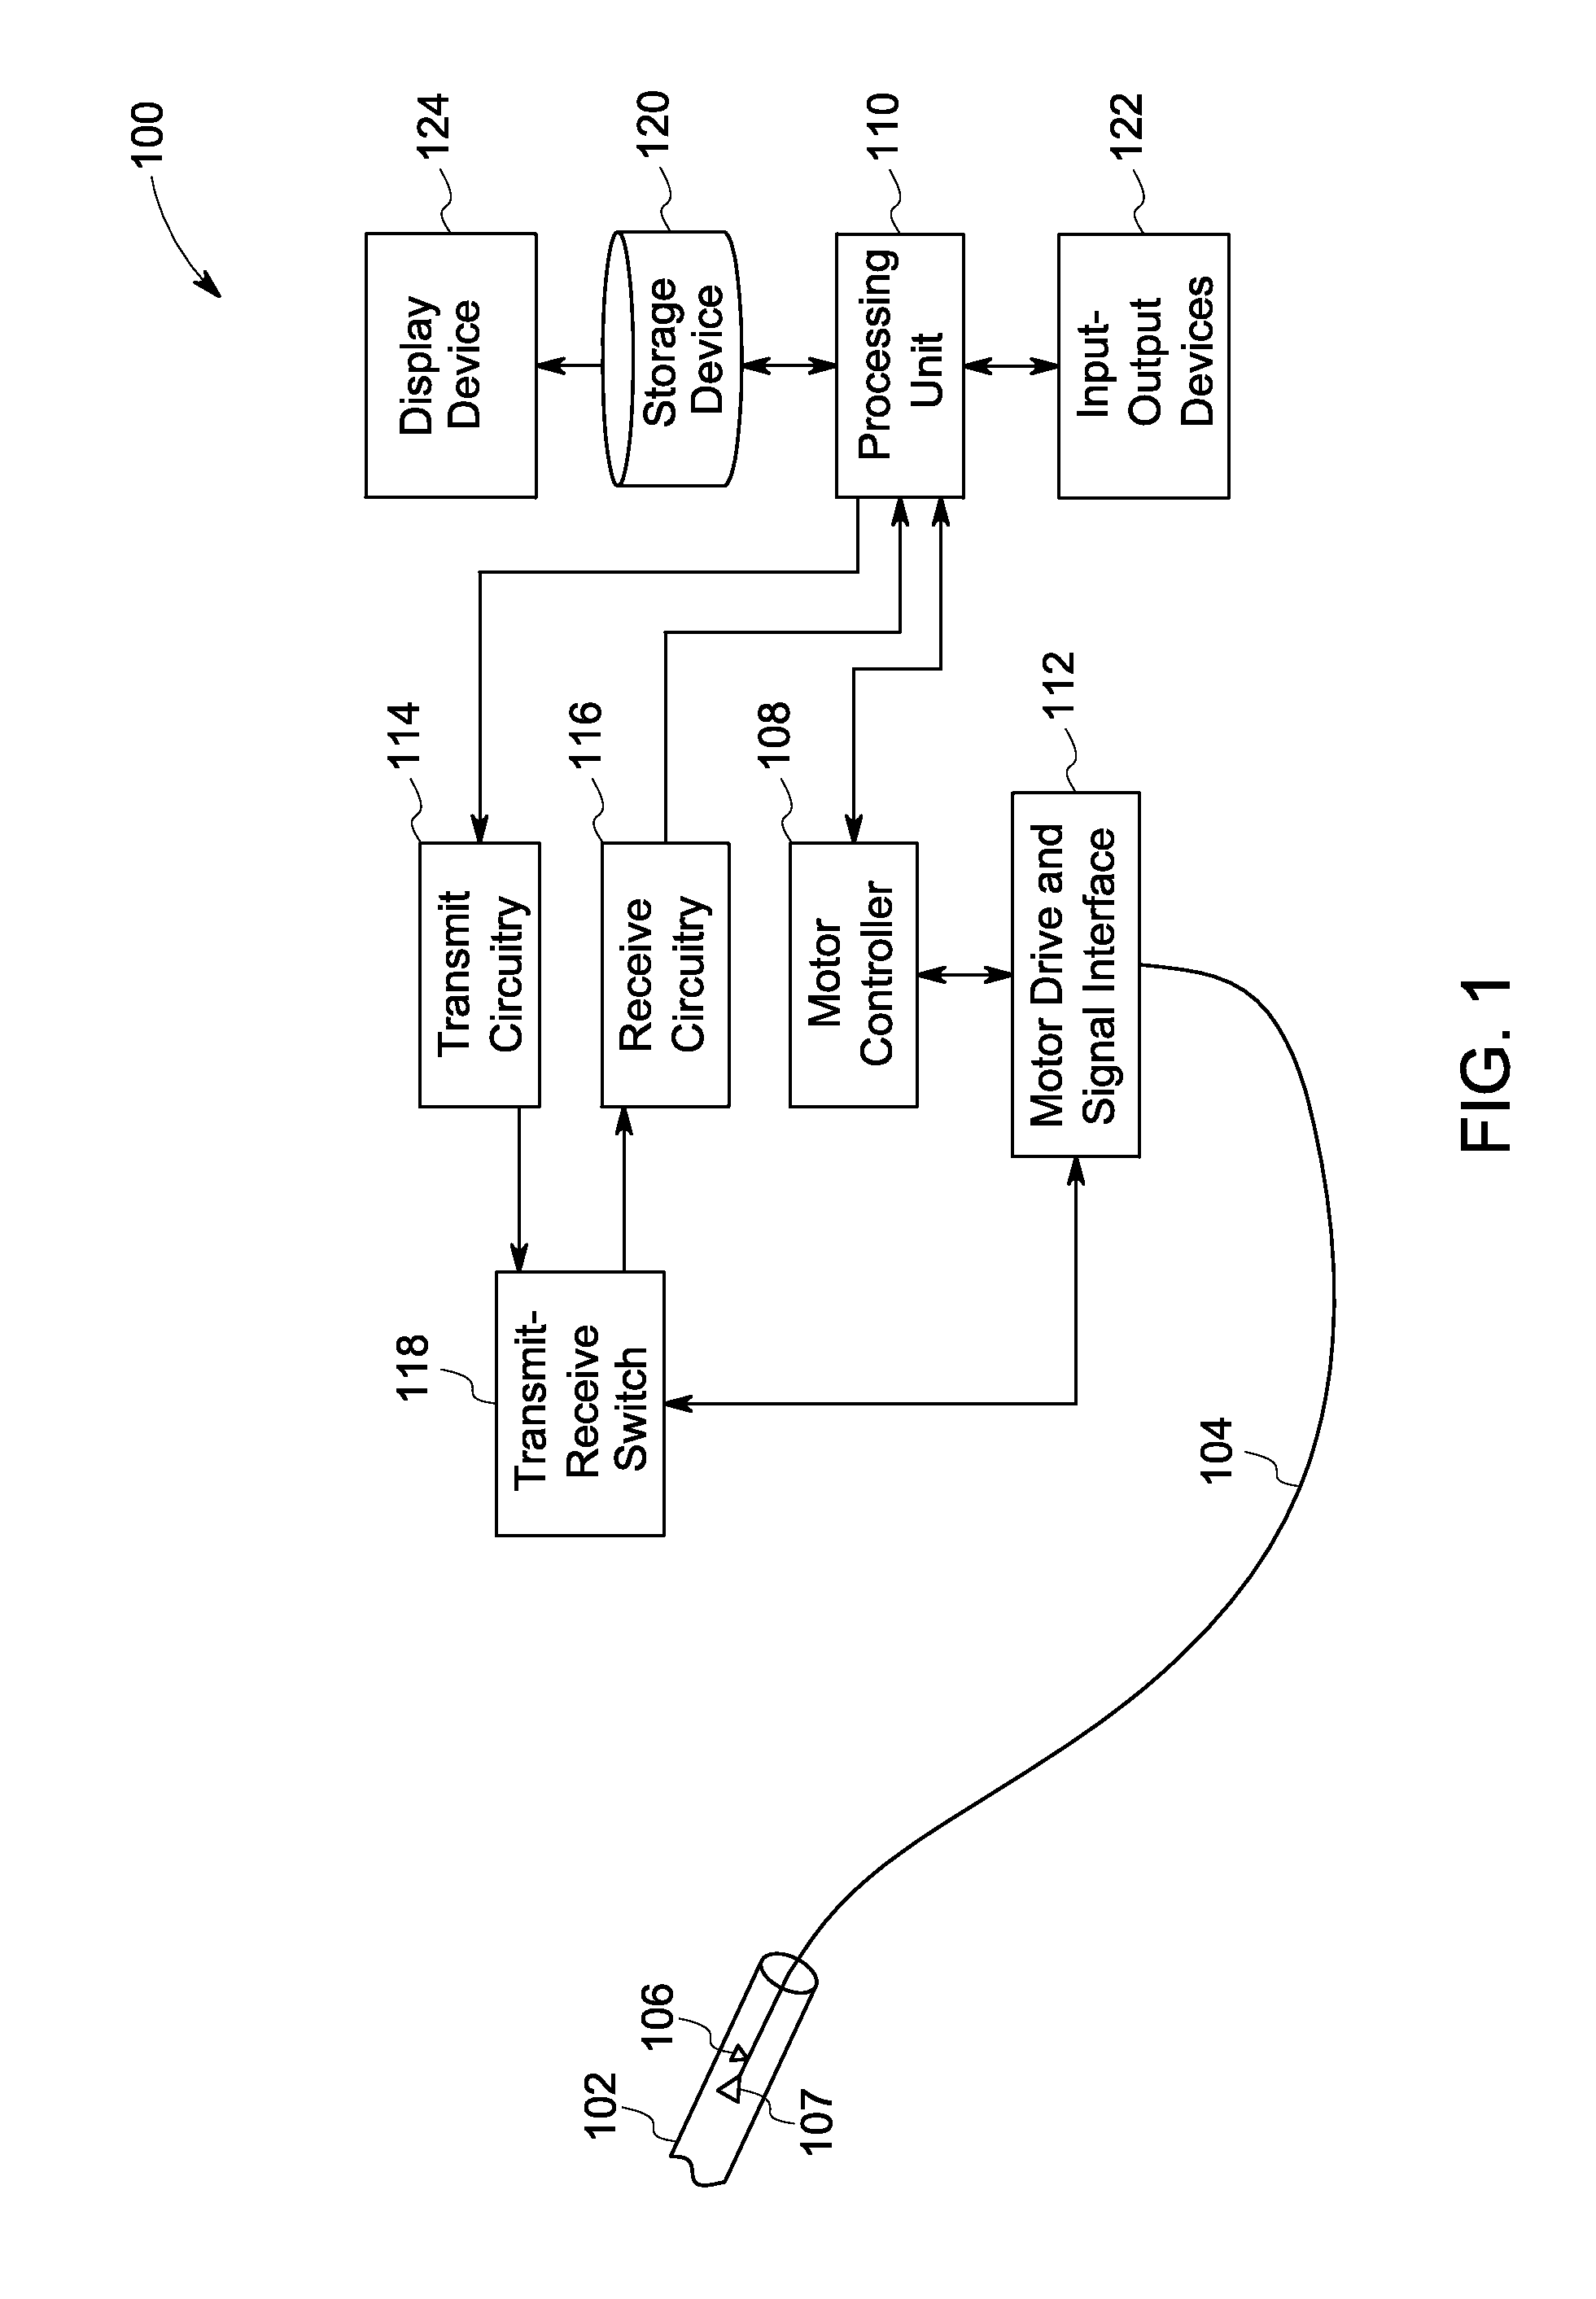 Methods and systems for intravascular imaging and flow measurement